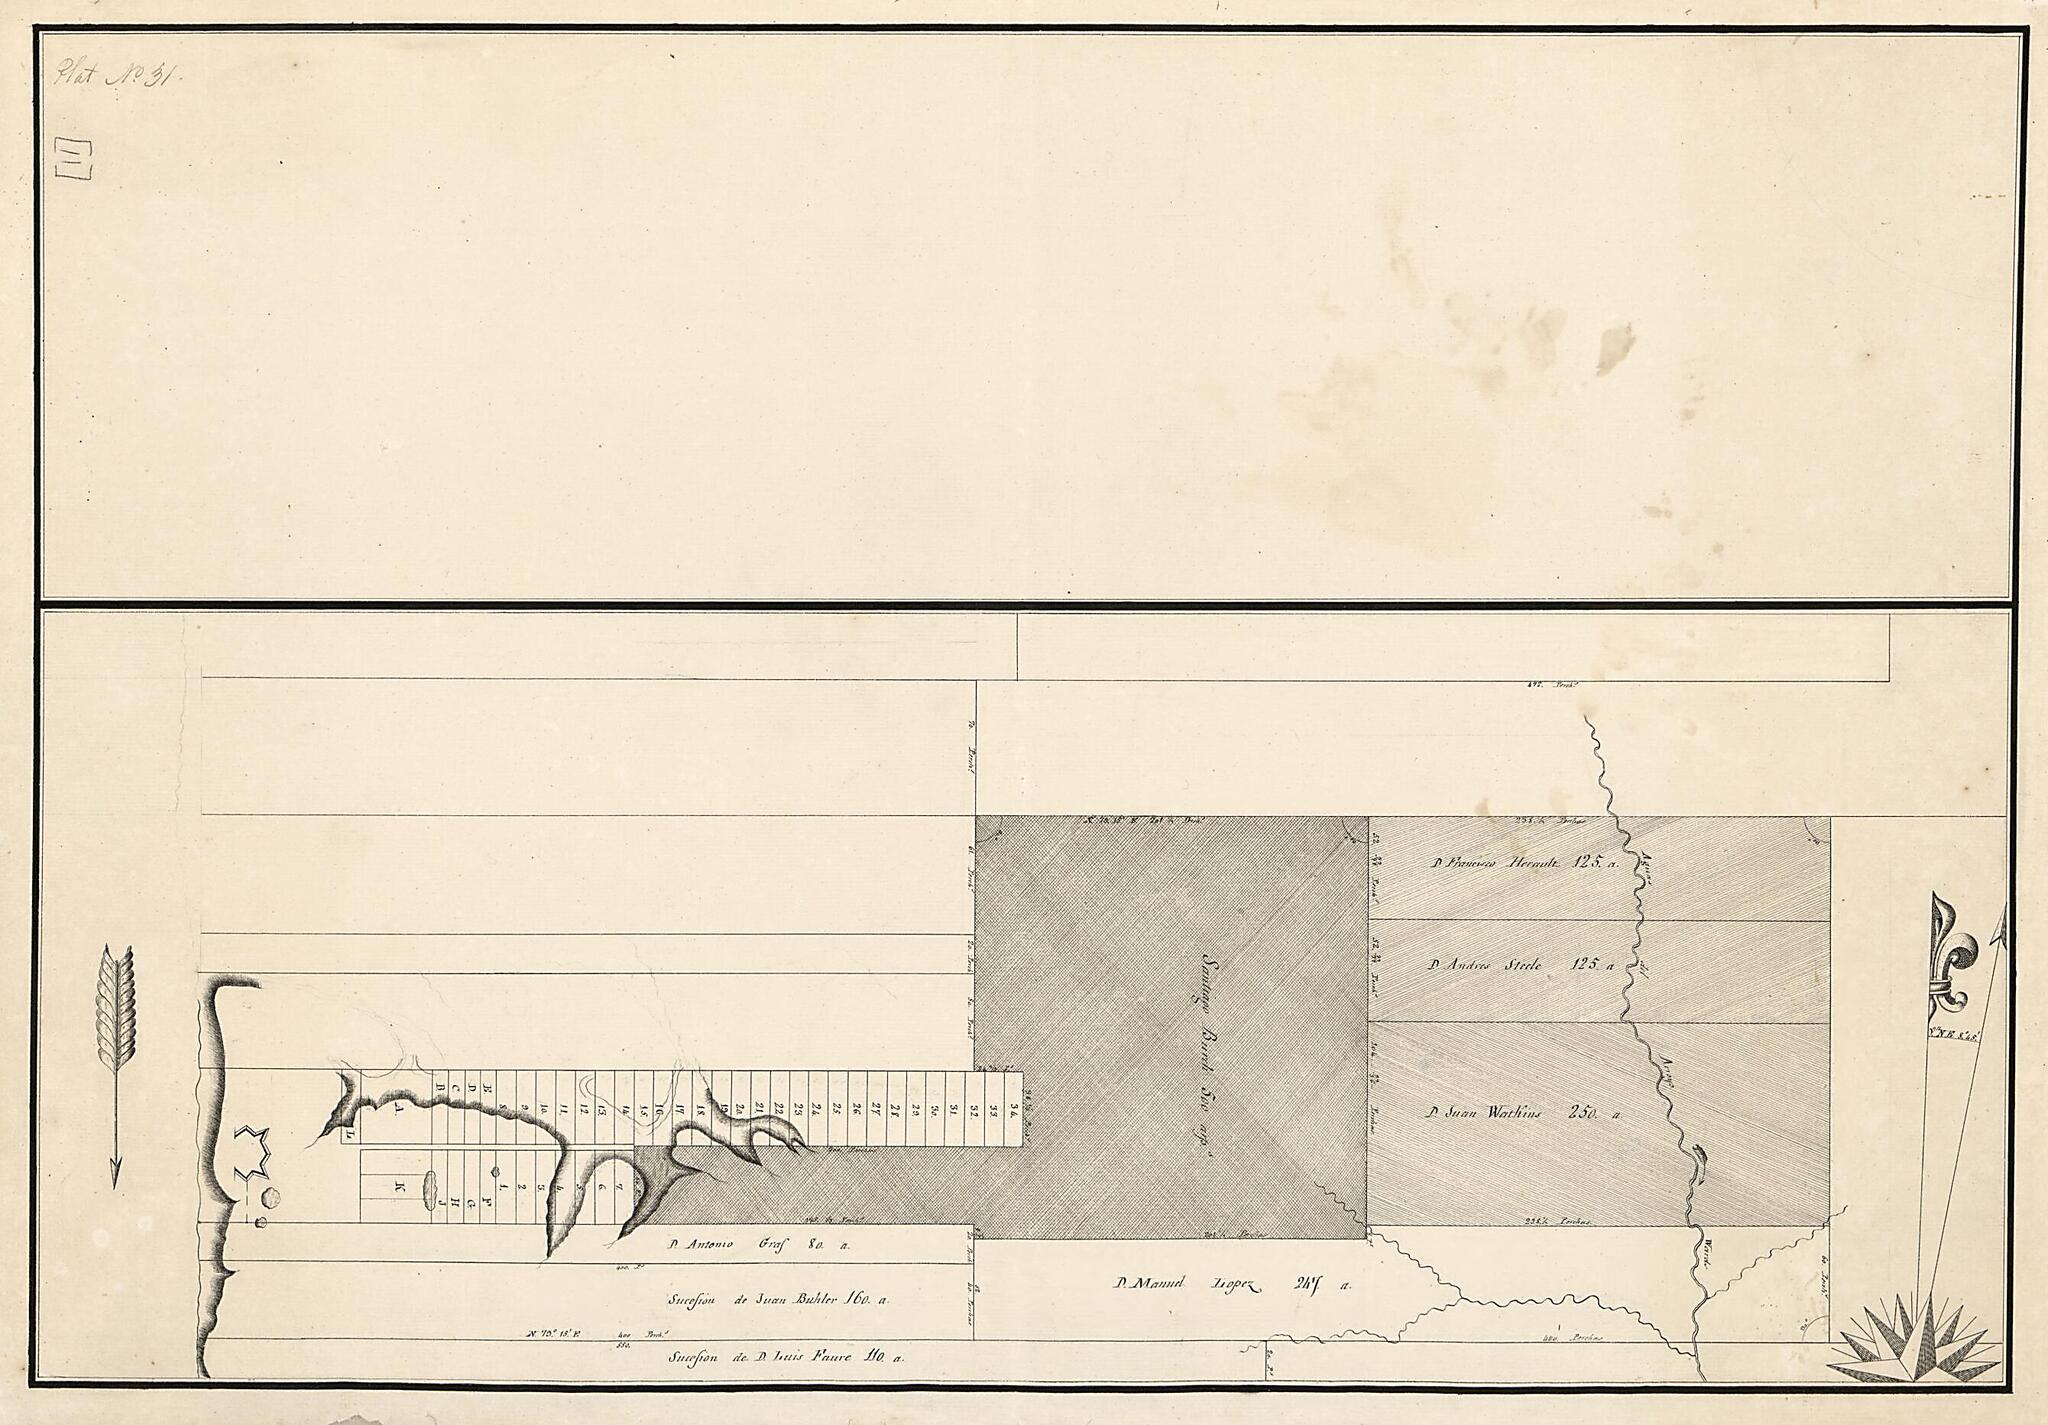 This old map of Plan of Baton Rouge and Adjoining Properties On the Mississippi River from 1805 was created by Vicente Sebastián Pintado in 1805